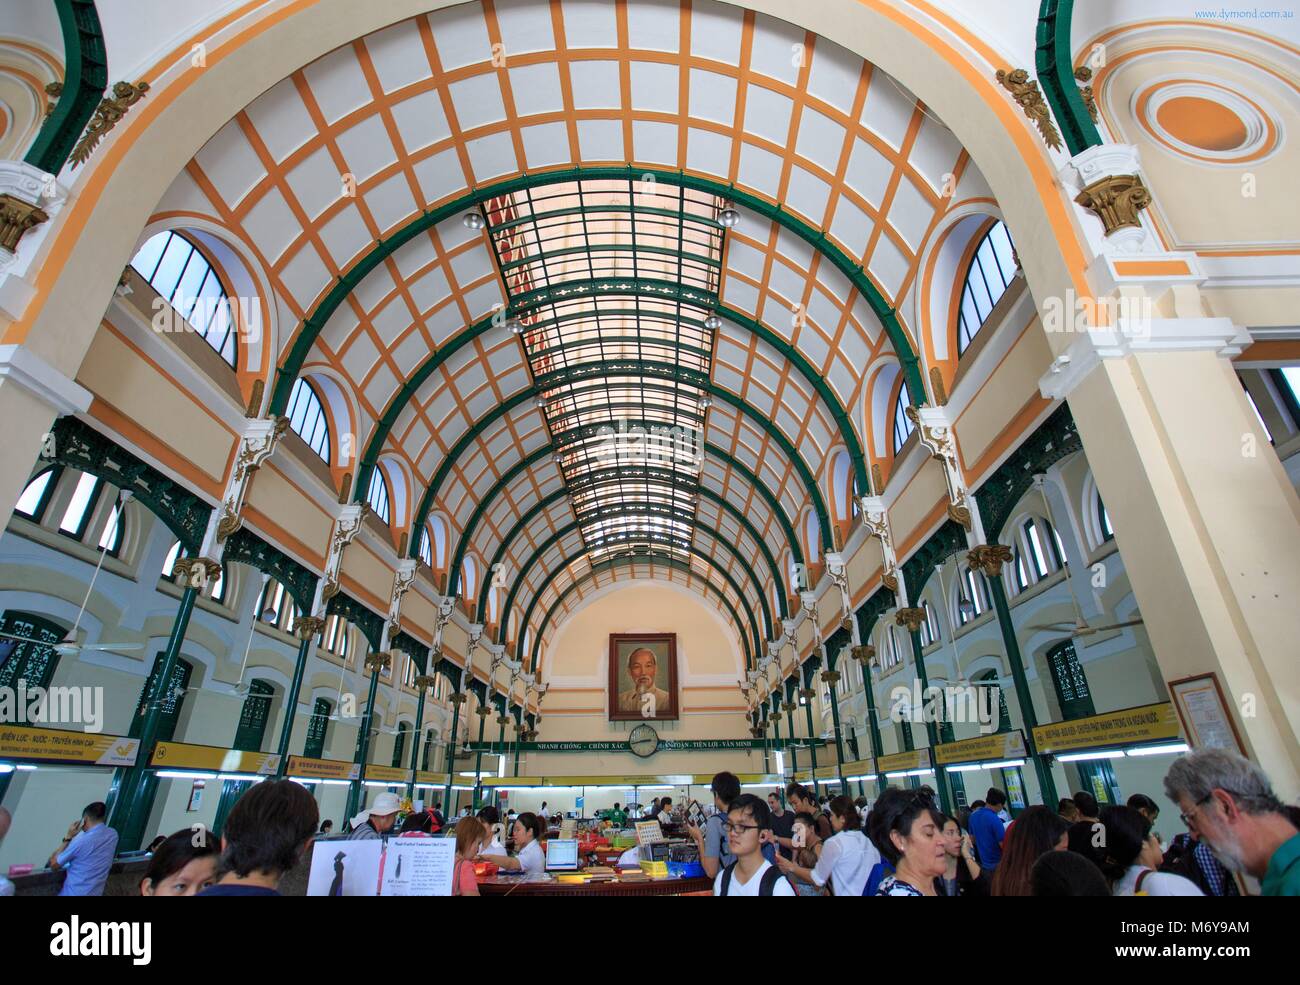 The interior of the Central Post Office in Ho Chi Minh City, Vietnam Stock Photo